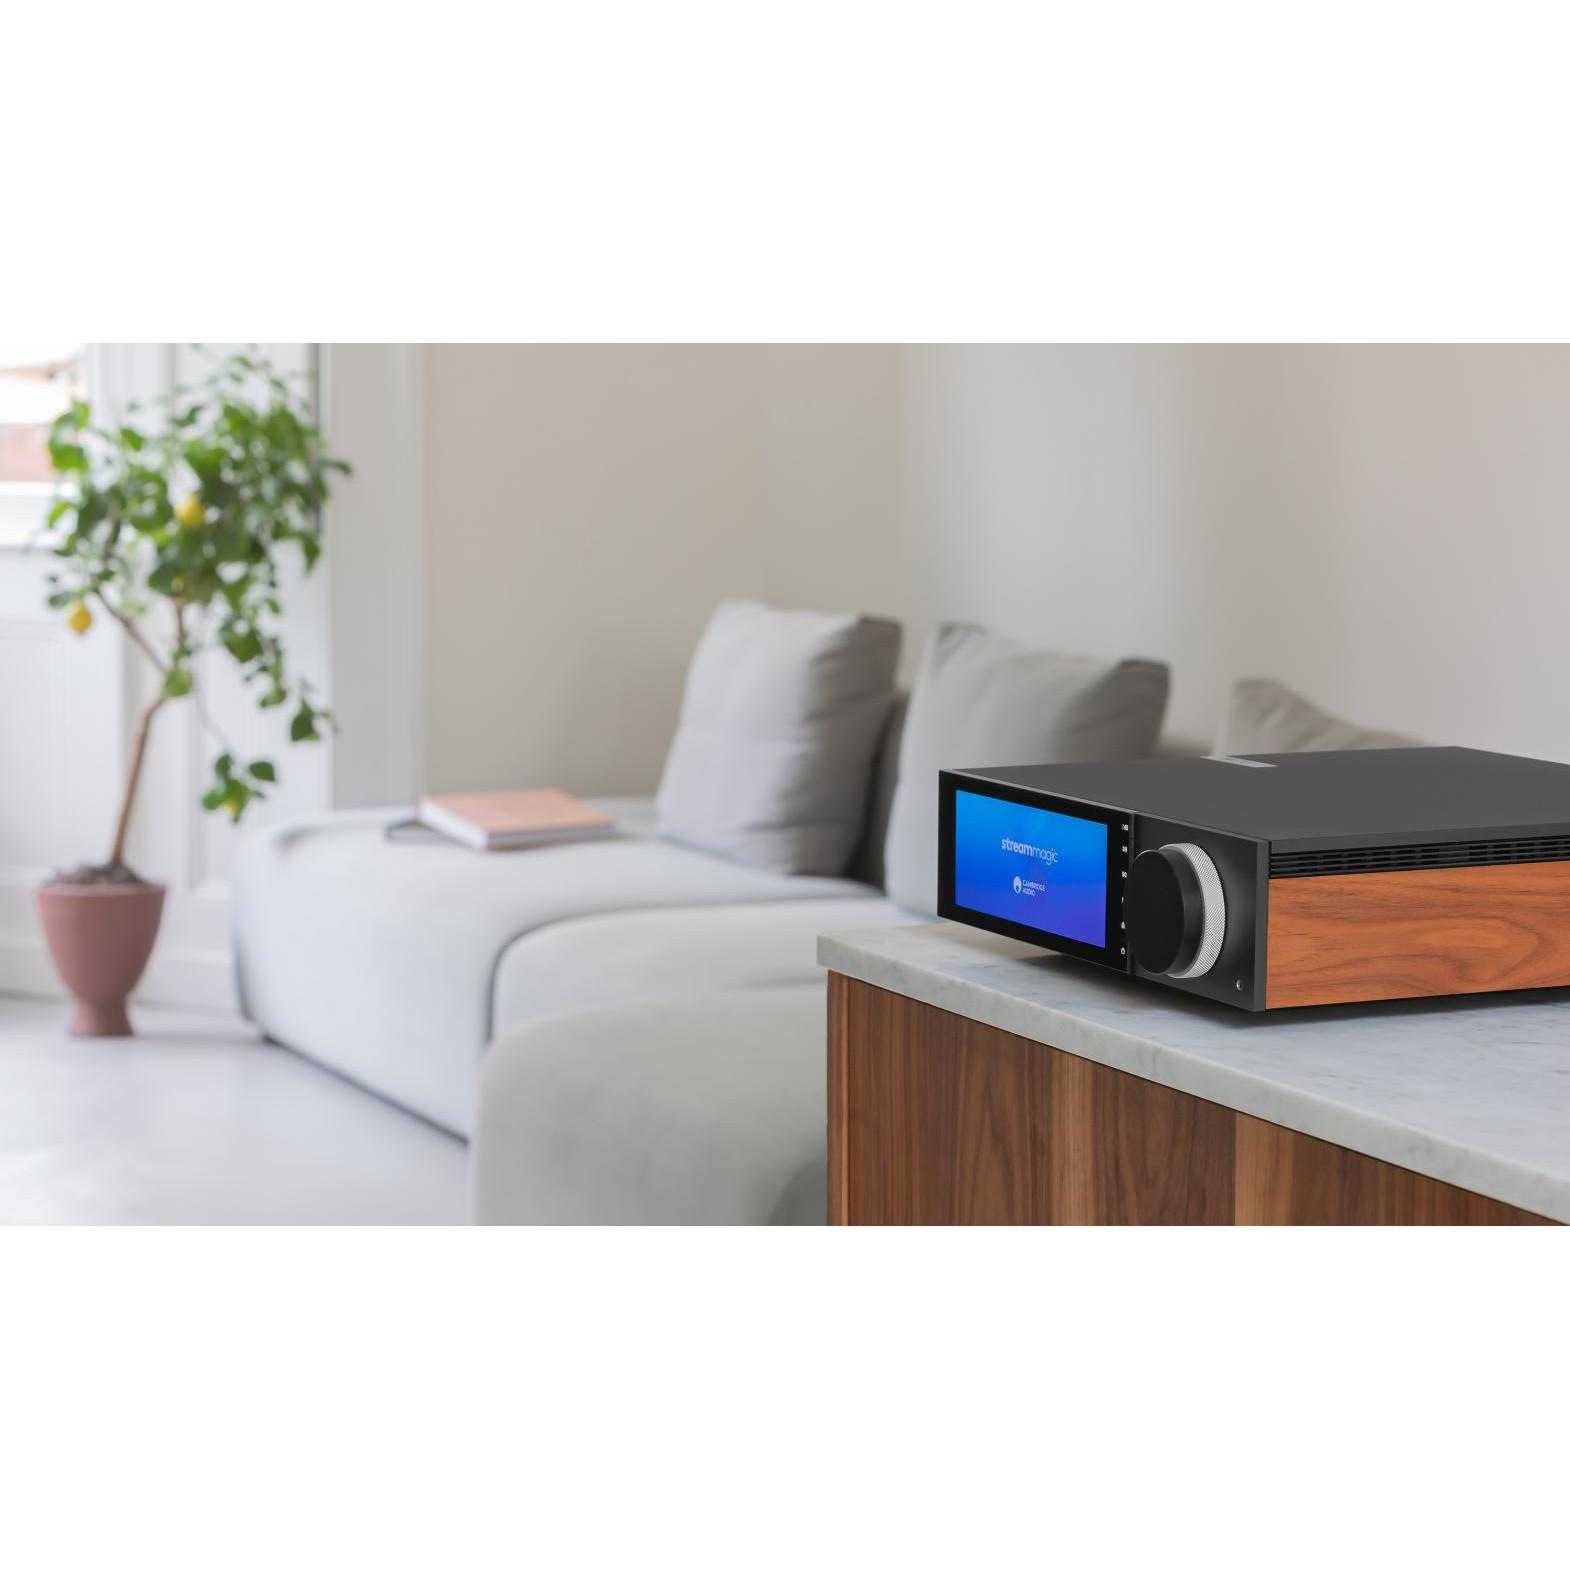 Cambridge audio's evo system wants to be the centre of your music collection